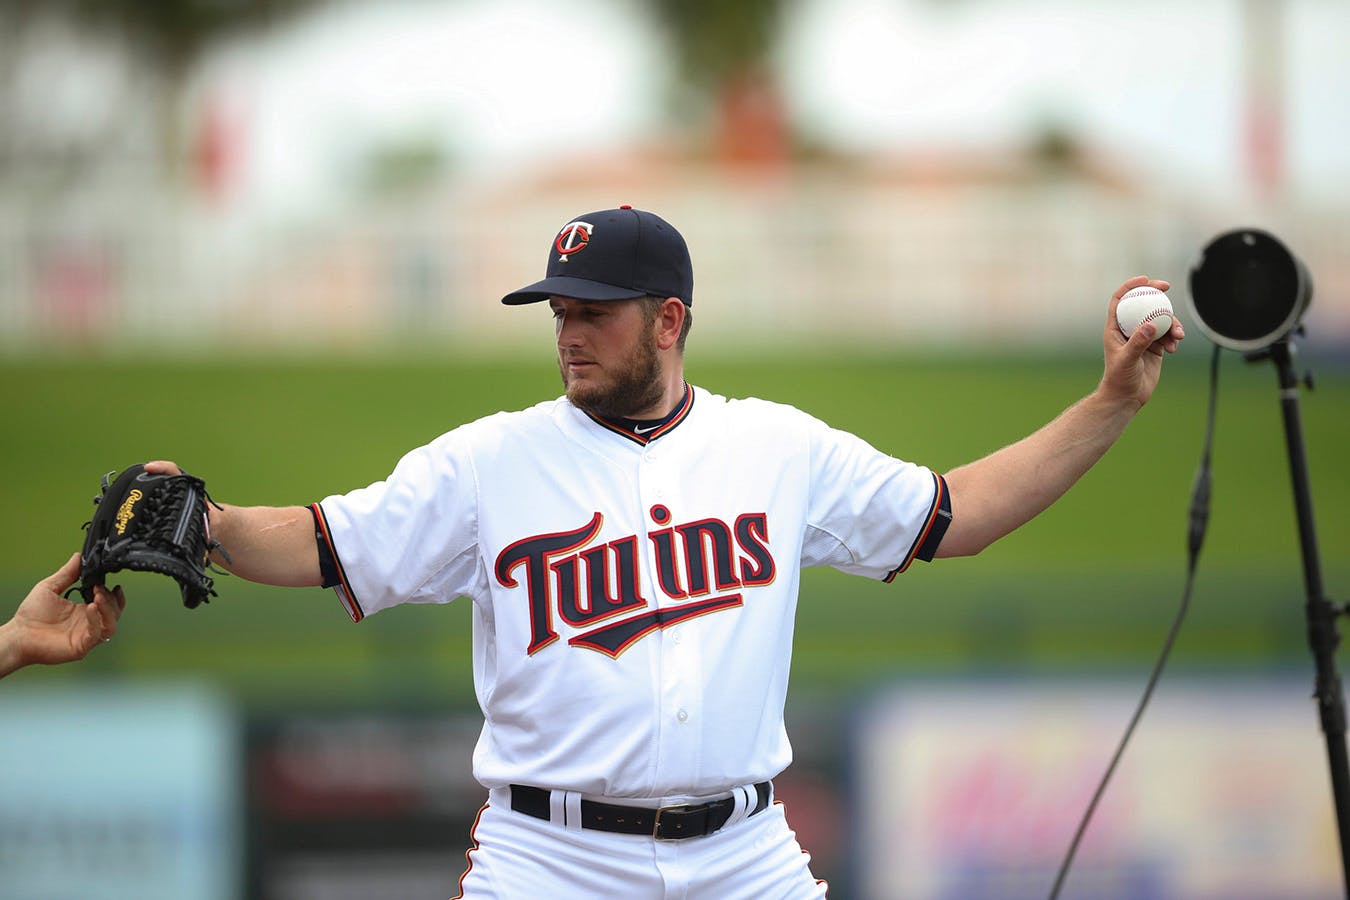 Twins closer Glen Perkins shut down a bullpen session Monday because of discomfort in his right side.